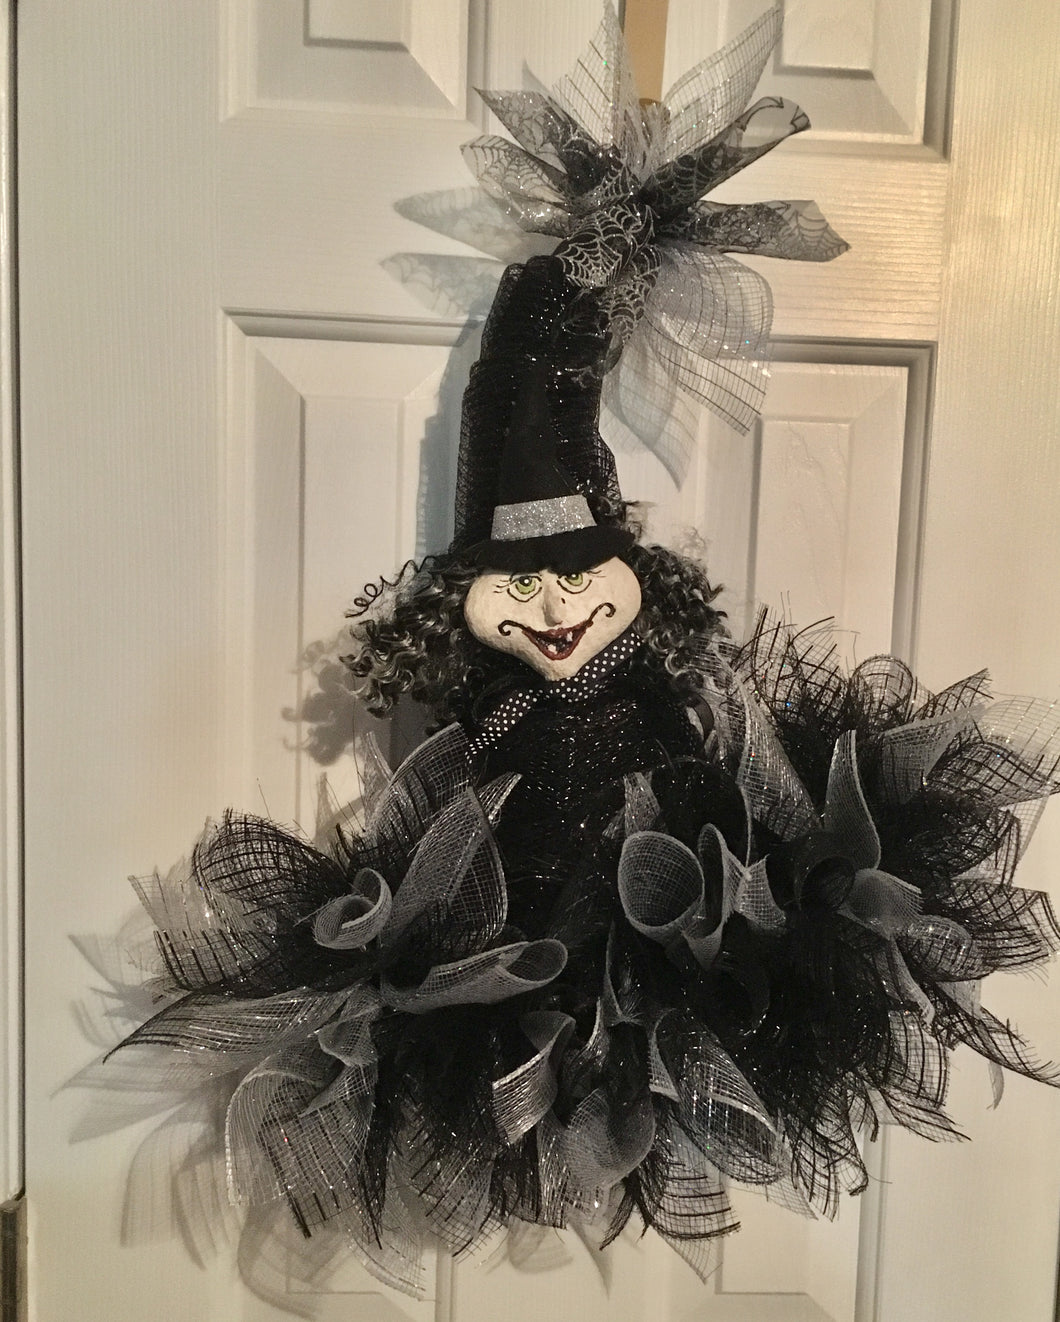 Witchie Witch... Oh, My is a handmade witch hat with this scary witch face that will surely decorate your door or wall for Halloween!  Made with a black and silver mesh mix and embellished with silver glitz for that special Halloween welcome. It measures approximately 24